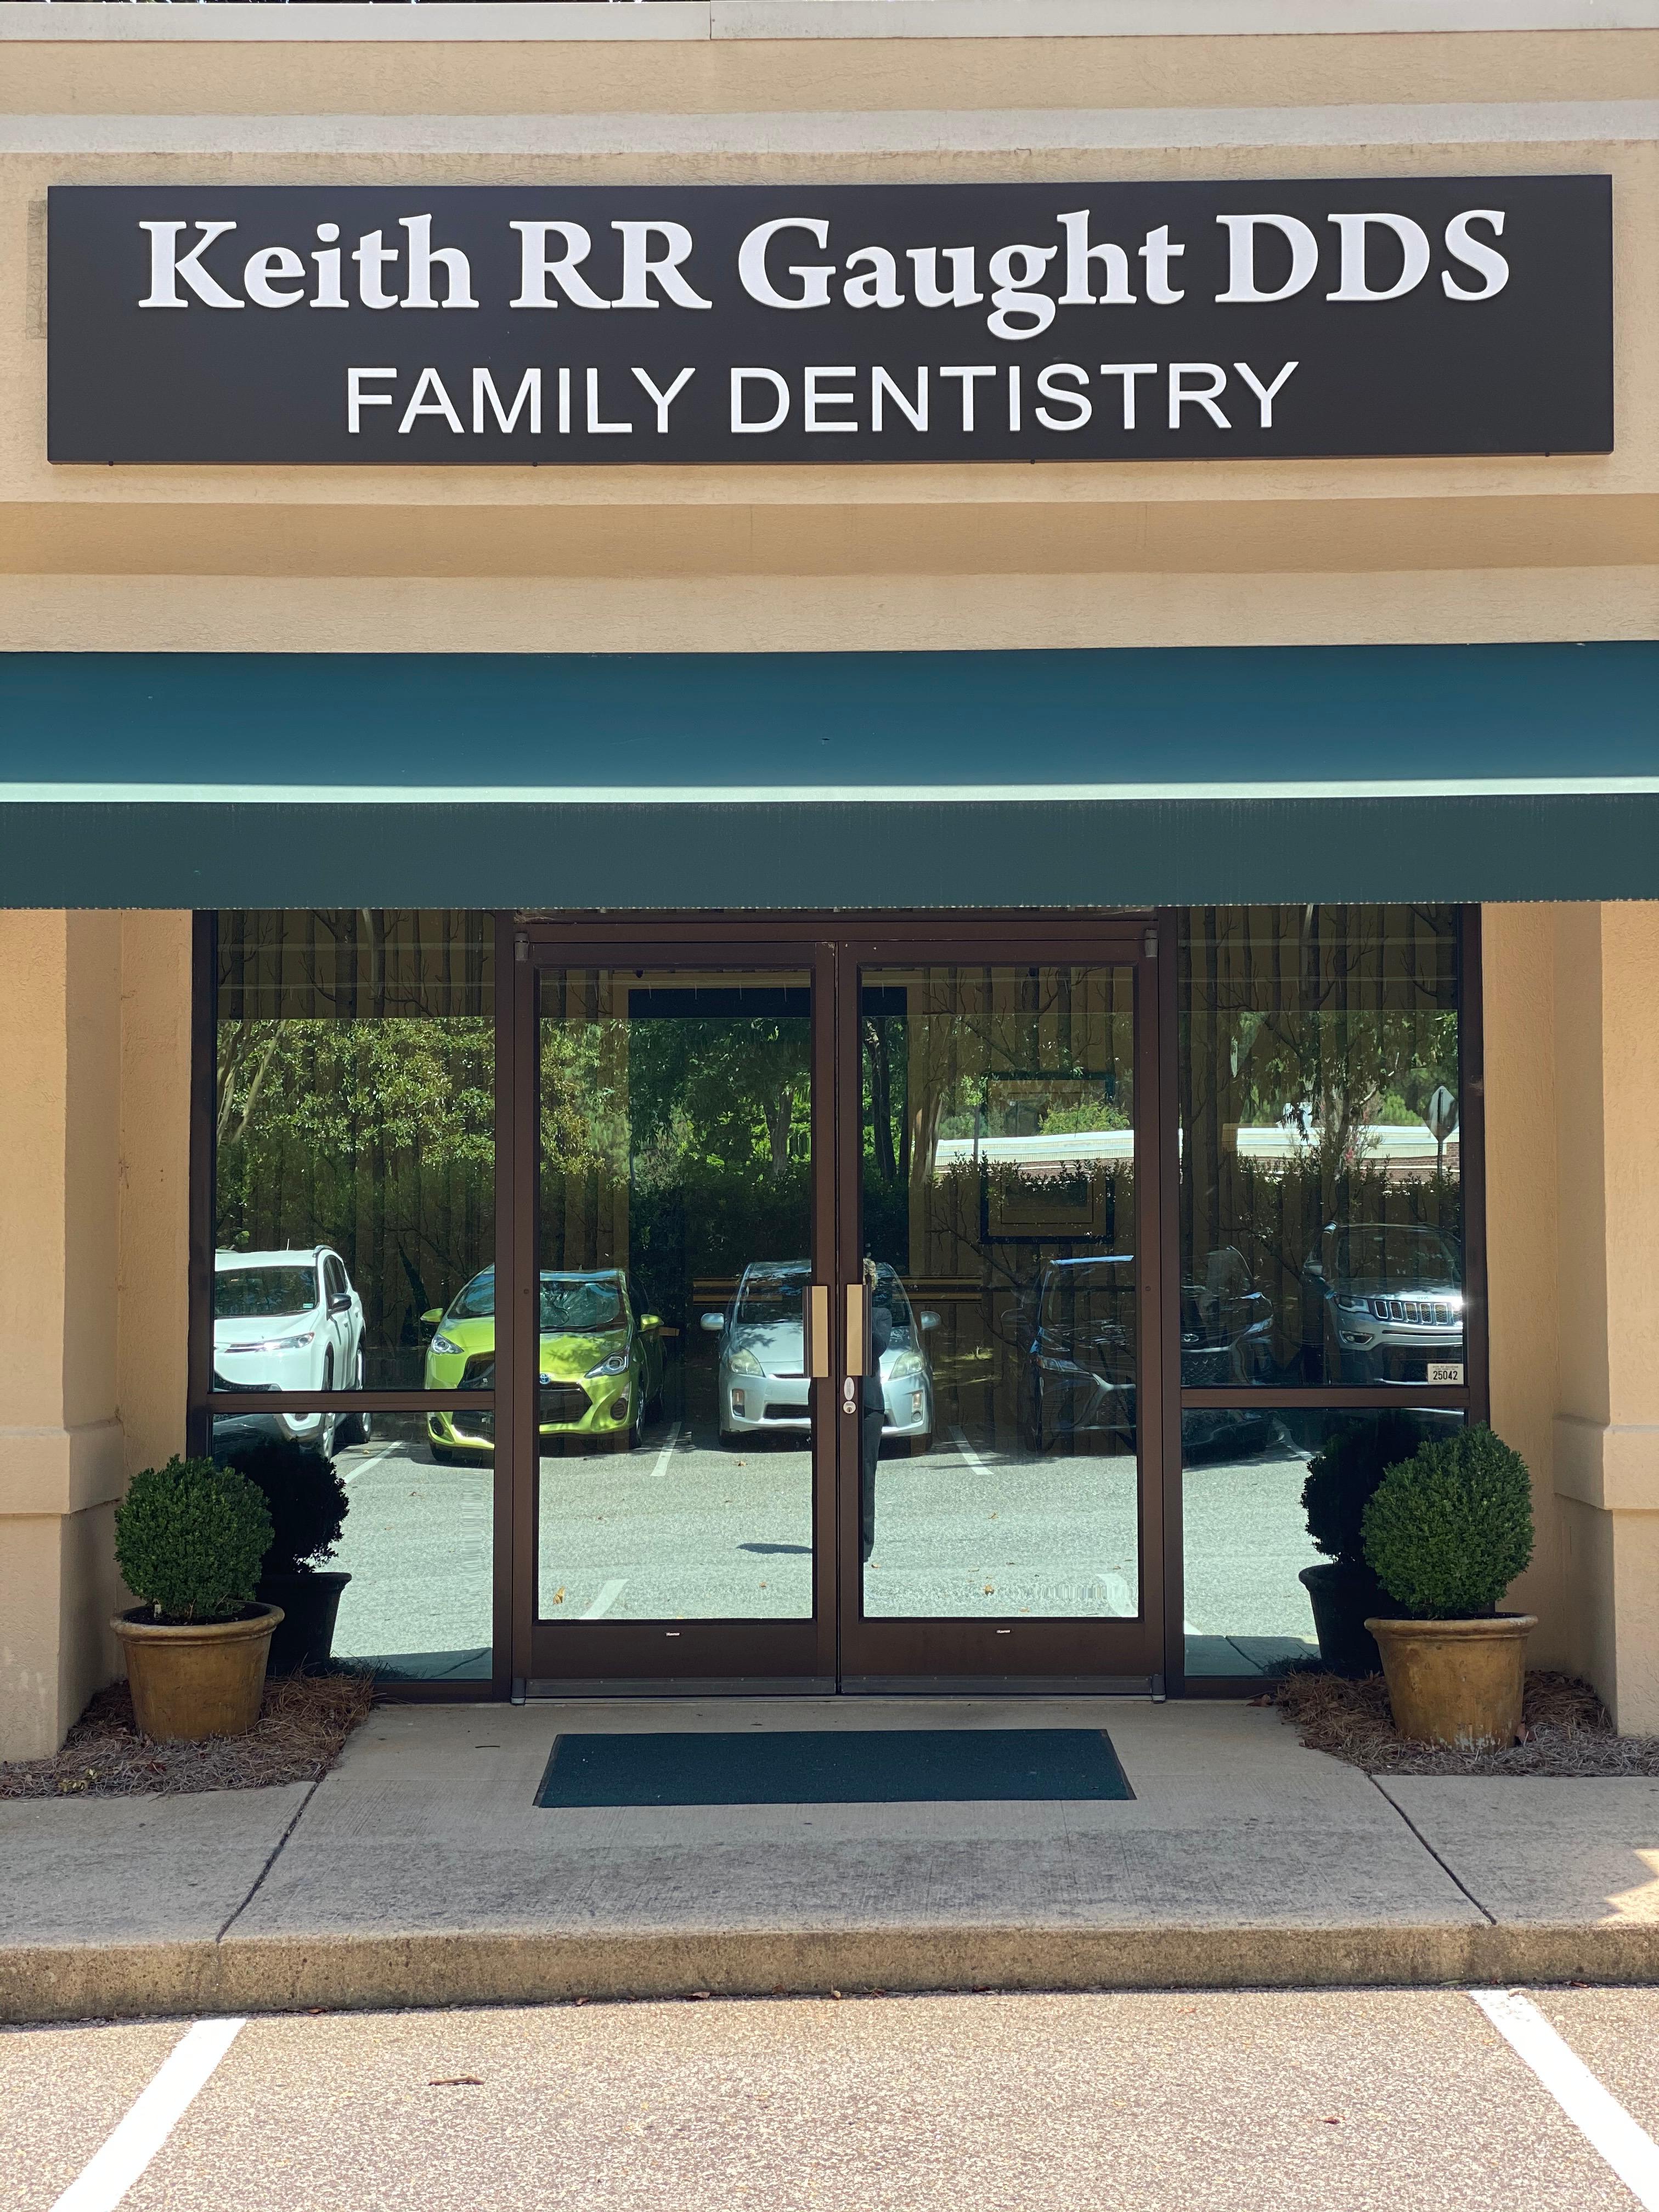 Keith RR Gaught DDS Family Dentistry Photo